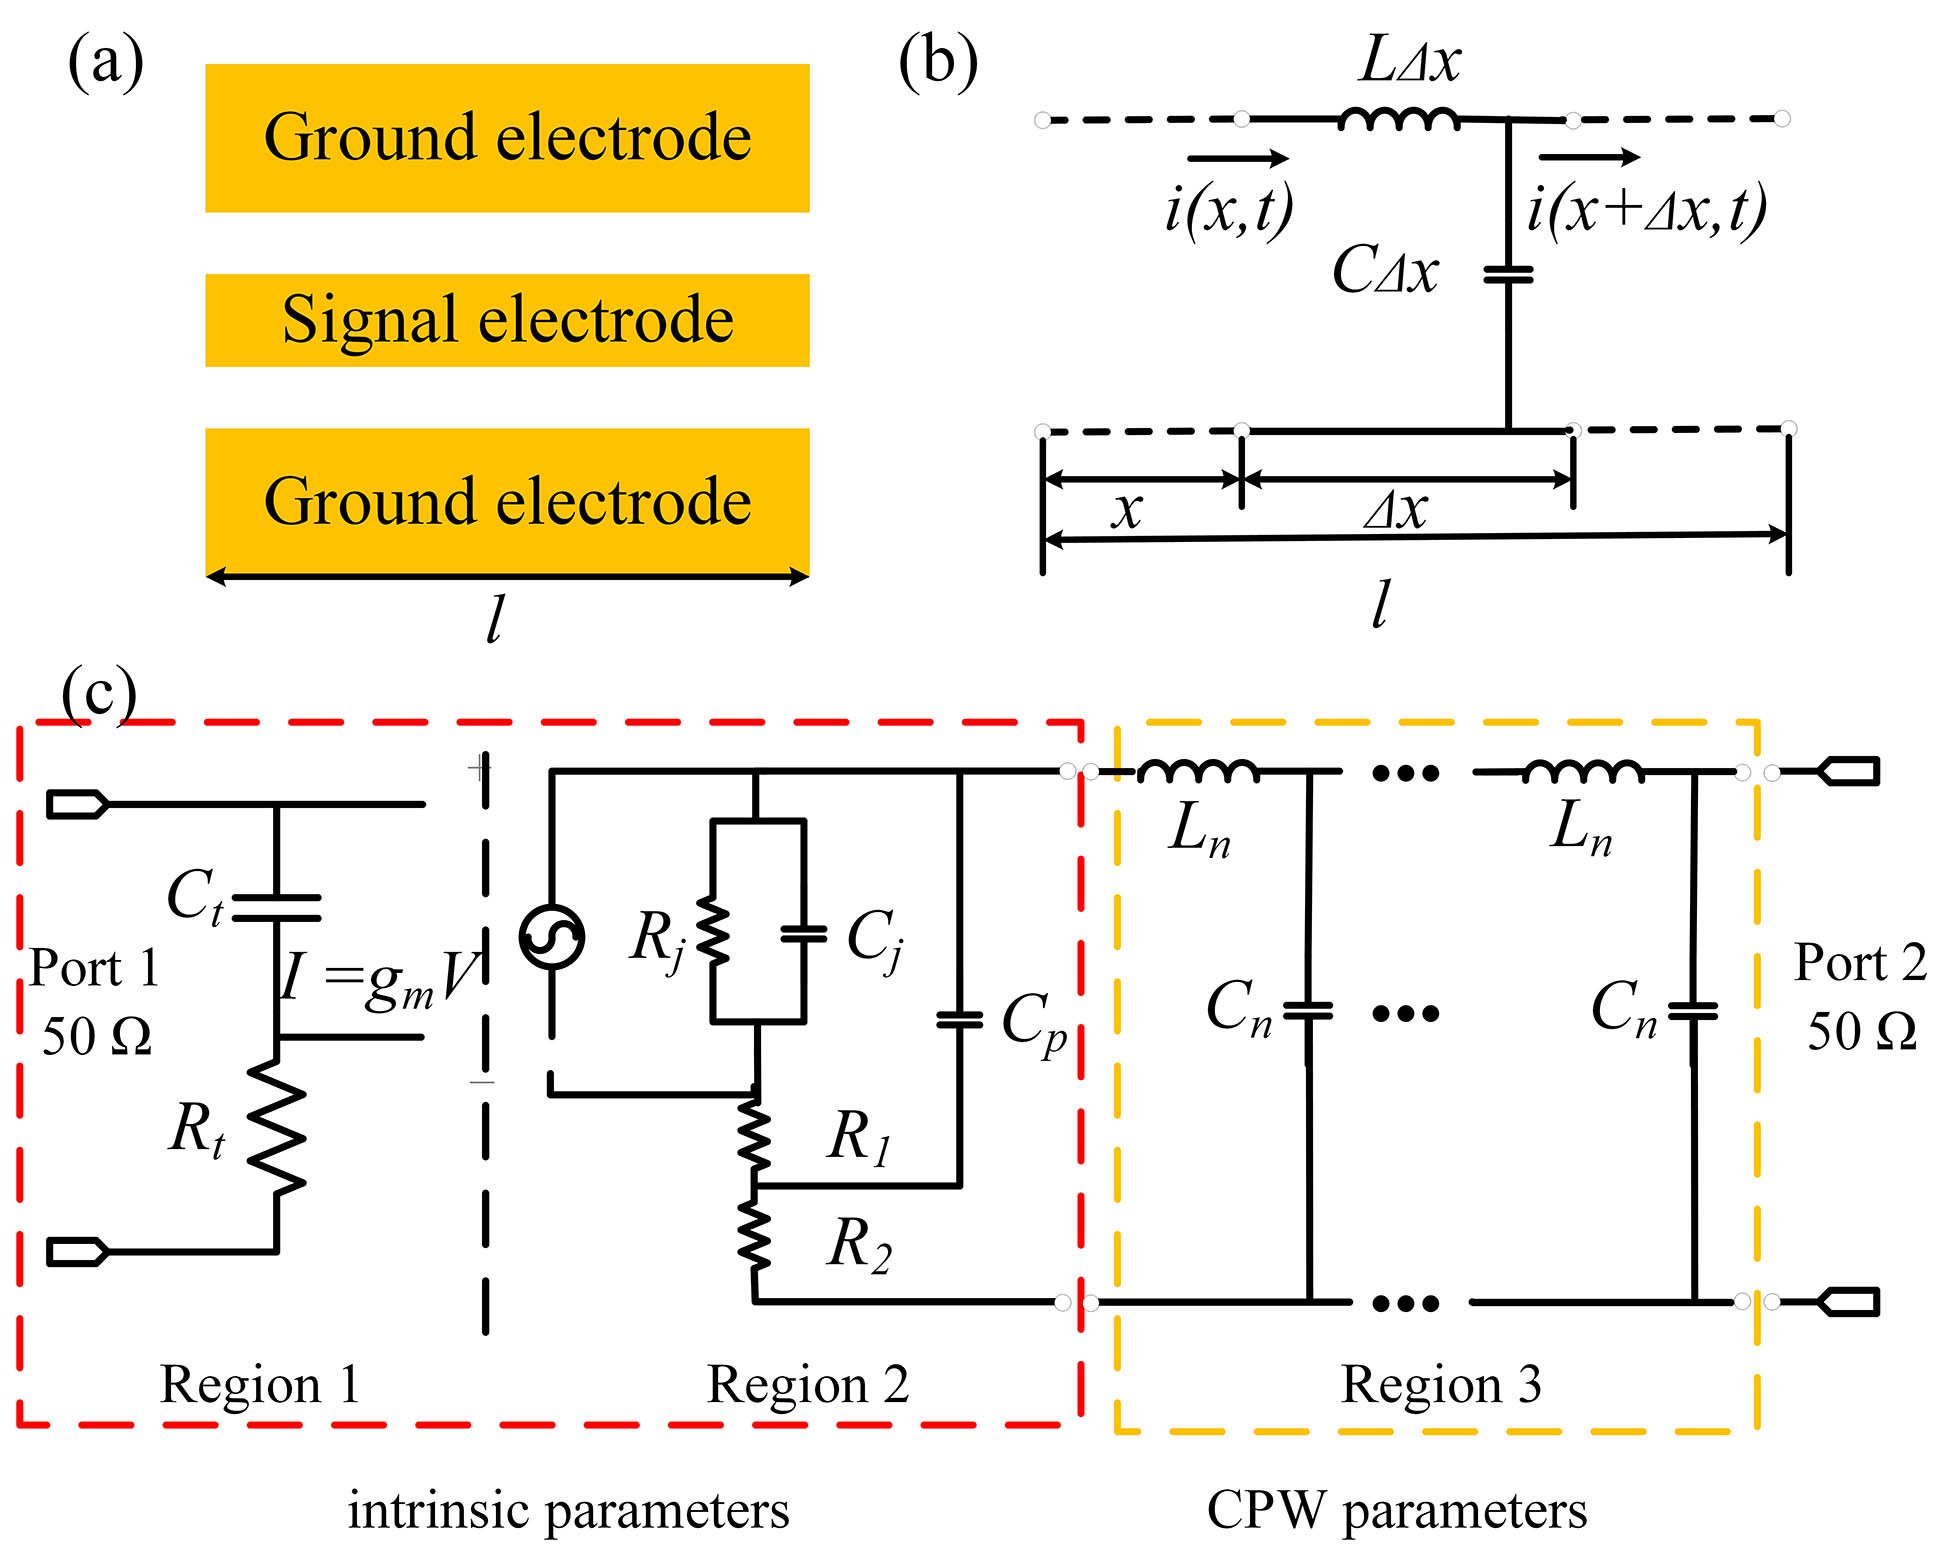 (a) Schematic diagram and (b) equivalent circuit model of the CPW. (c) The equivalent circuit model of the PD. Region 1 represents the transit time parameters, Region 2 represents the bulk and parasitic parameters of the PD, and Region 3 represents the n-section distributed parameter model of the CPW. The box on the left represents the intrinsic bandwidth parameters.